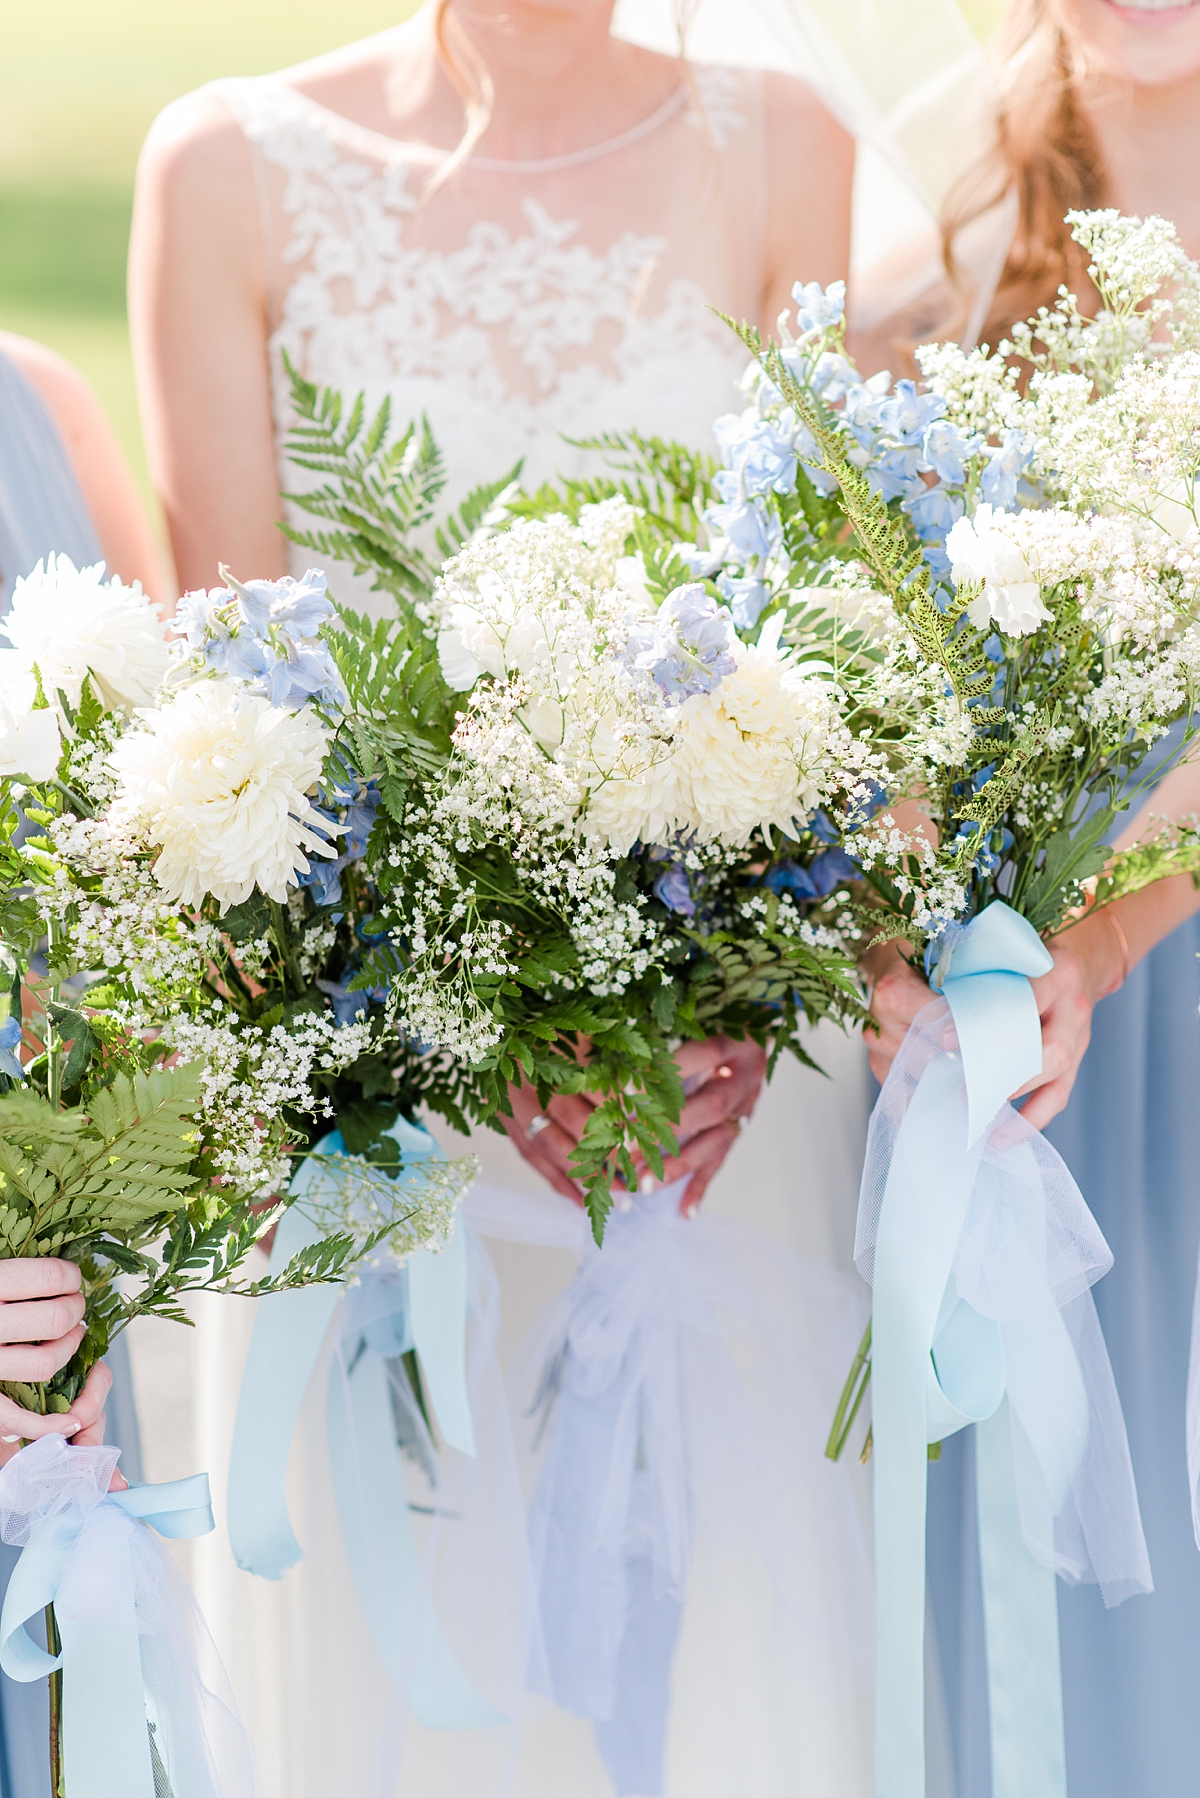 Bridal Party Portraits with Blue Bridesmaid Dresses at Granary at Valley Pike Rustic Wedding. Wedding Photography by Richmond Wedding Photographer Kailey Brianne Photography. 